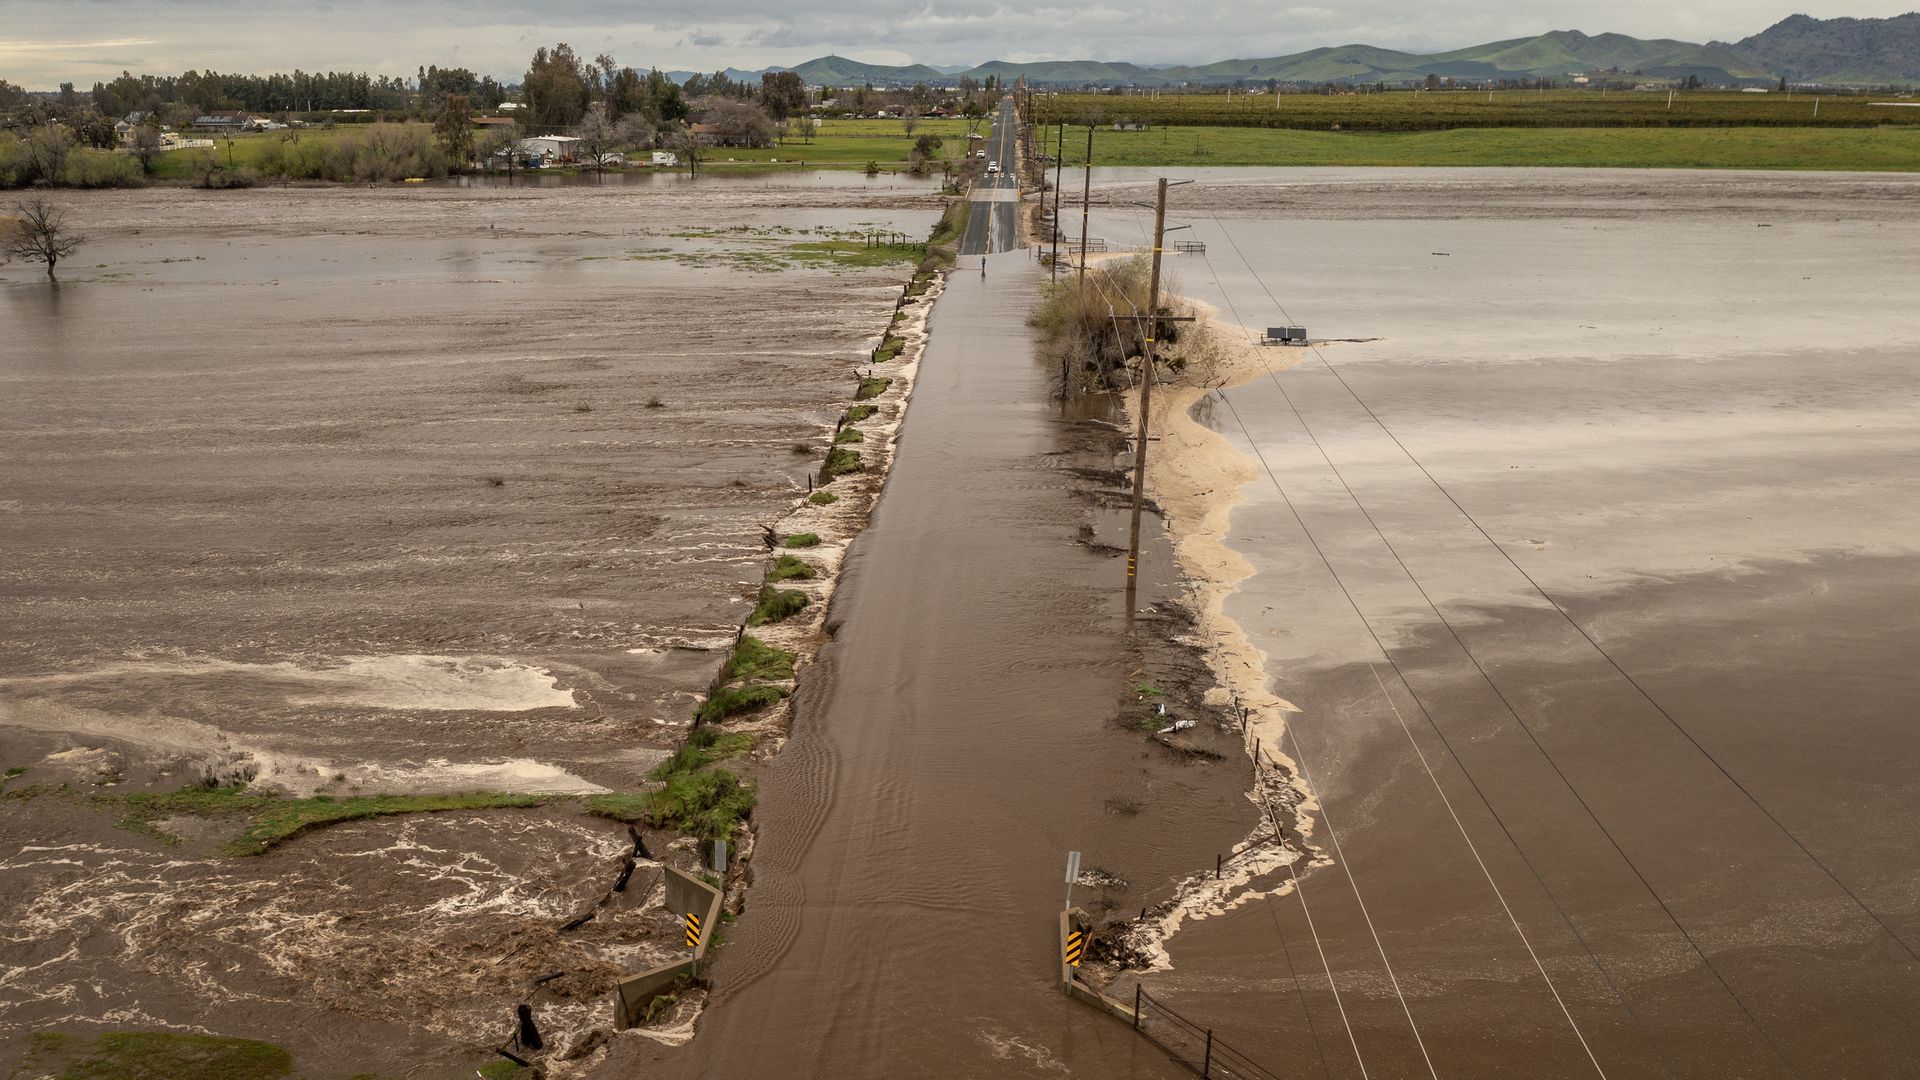 Flooding taking place in Central California from atmospheric river storms in March 2023.